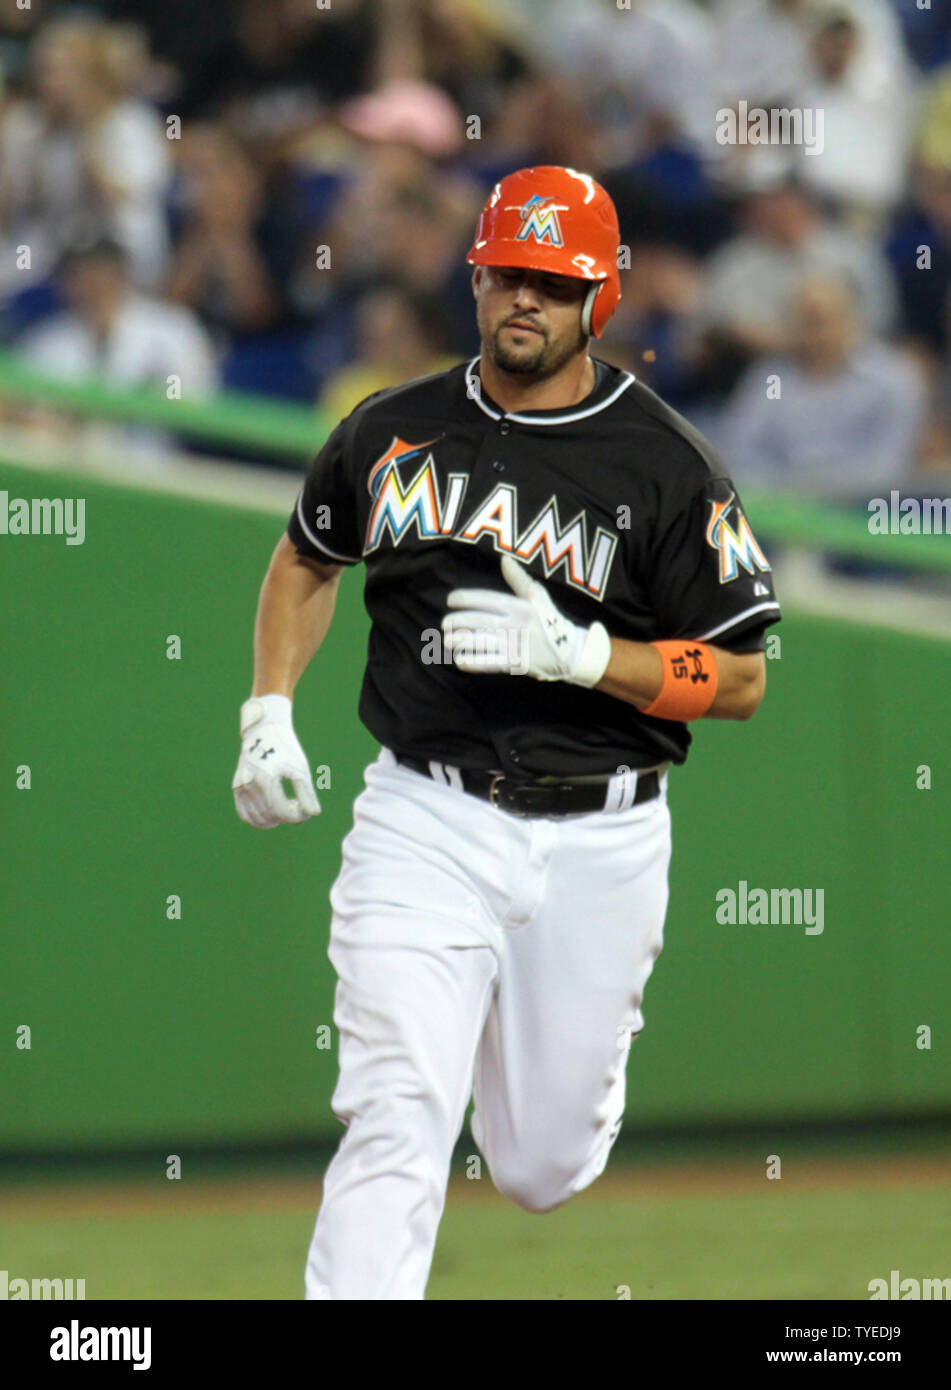 The Miami Marlins Gaby Sanchez runs to third base against the New York  Yankees at the new Miami Marlins Ball Park in the second exhibition game  April 2, 2012, in Miami, Florida. .